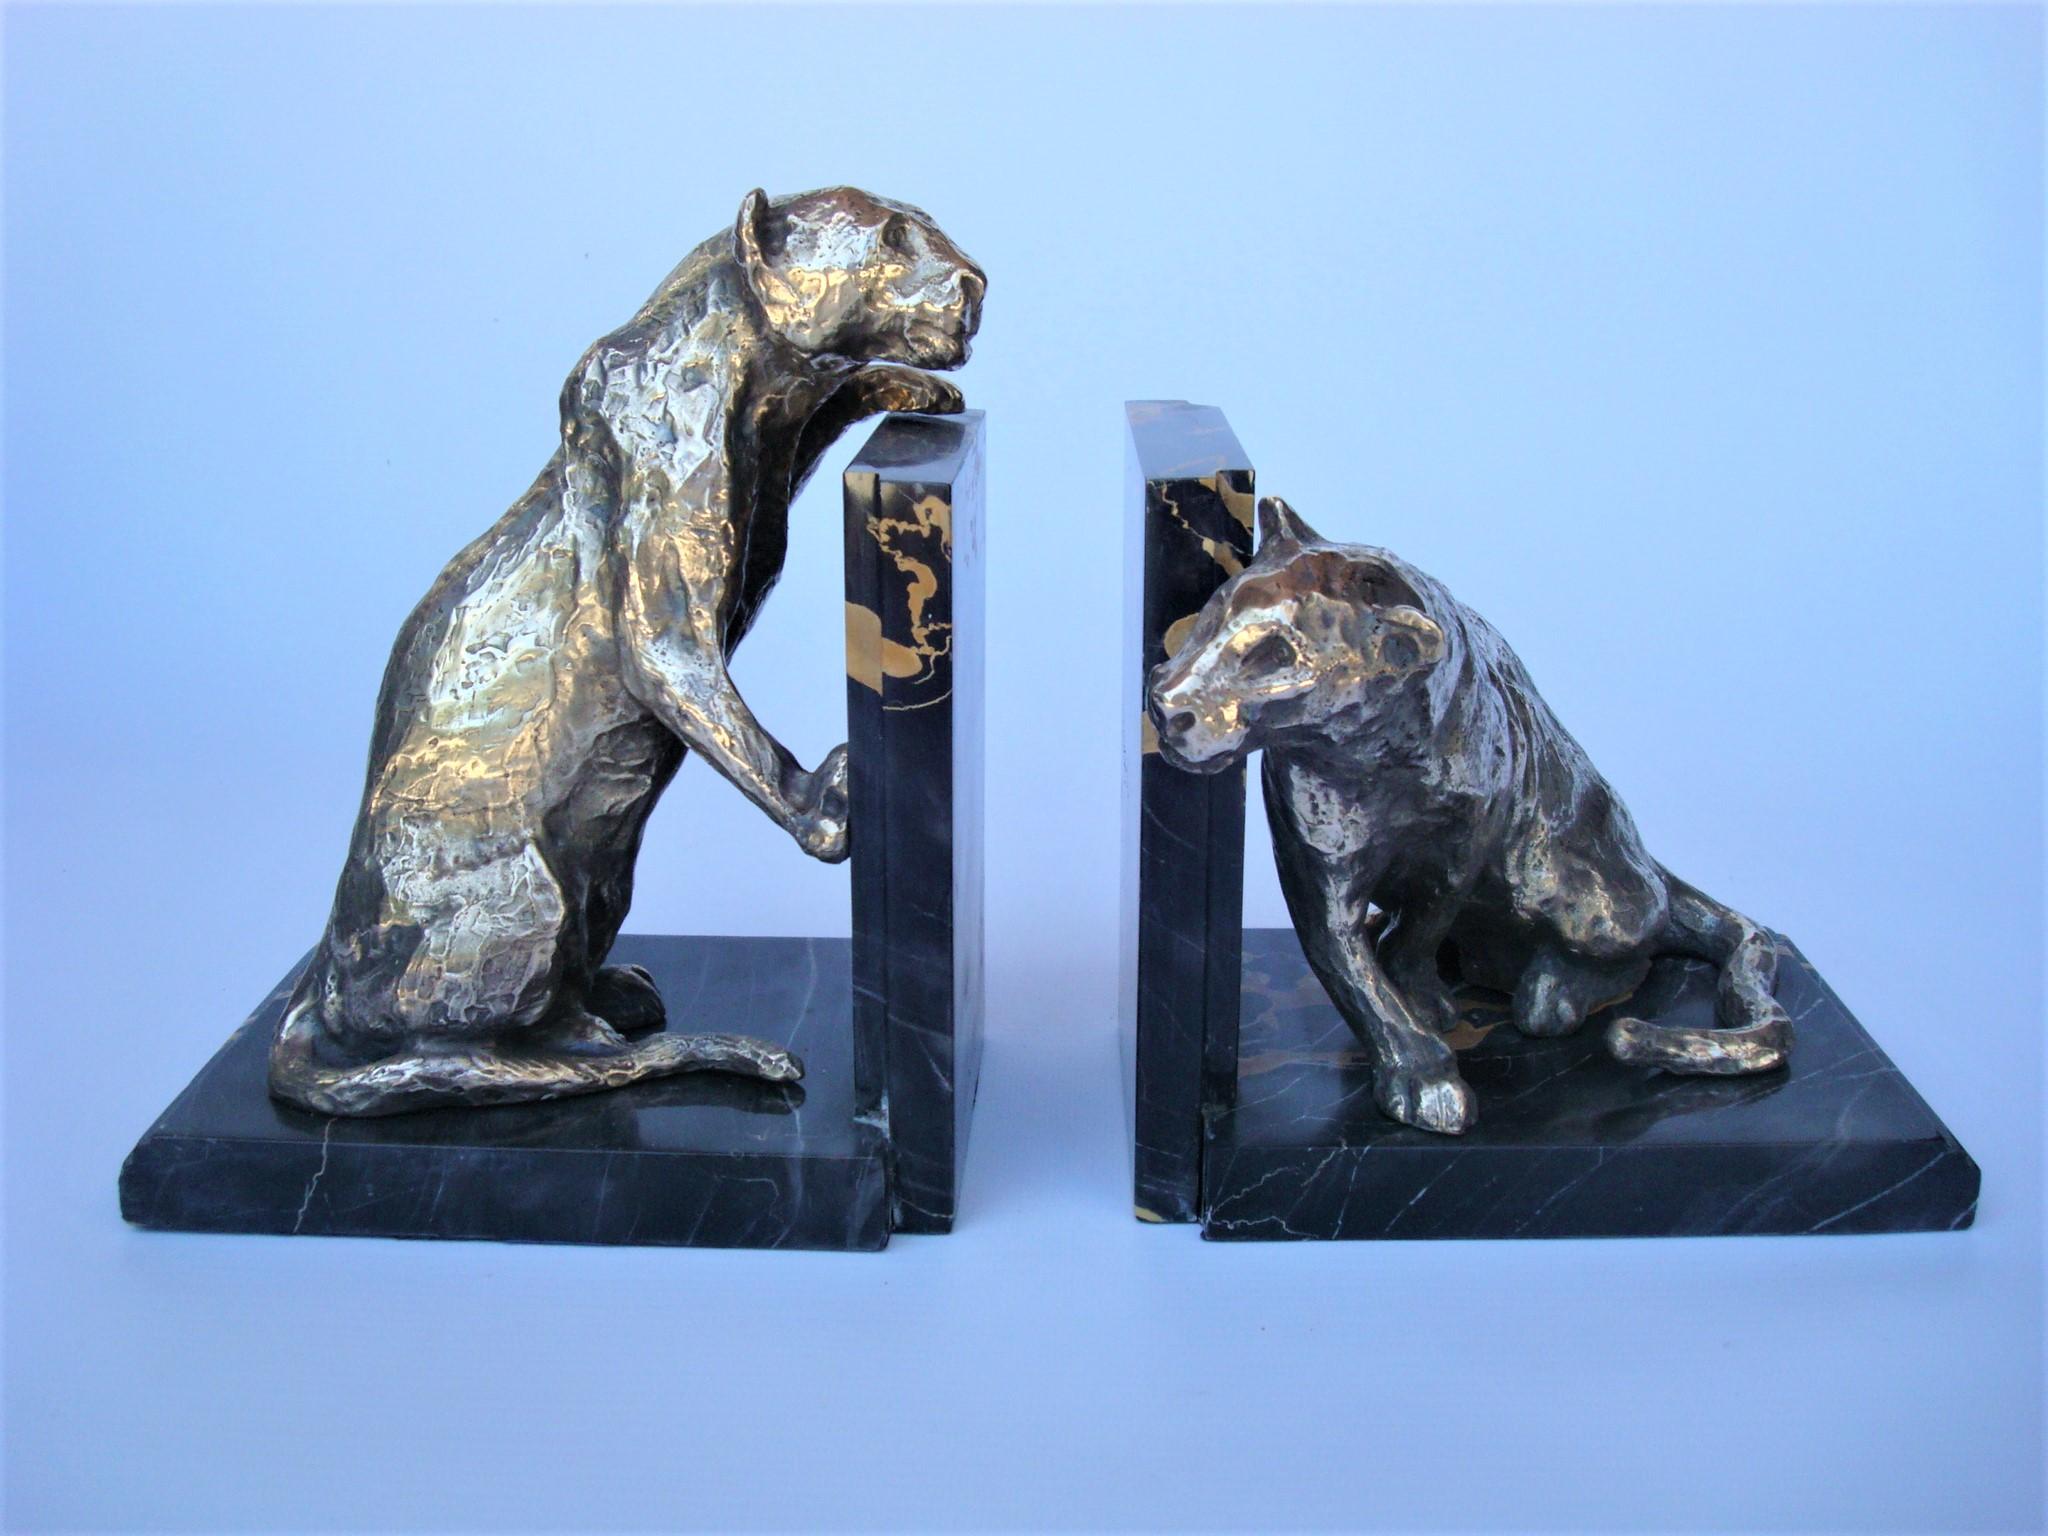 Roger Godchaux (1878 - 1958): two lioness figures / sculptures
Silvered bronze mounted as bookends on marble plinths; both with plaque to base inscribed 